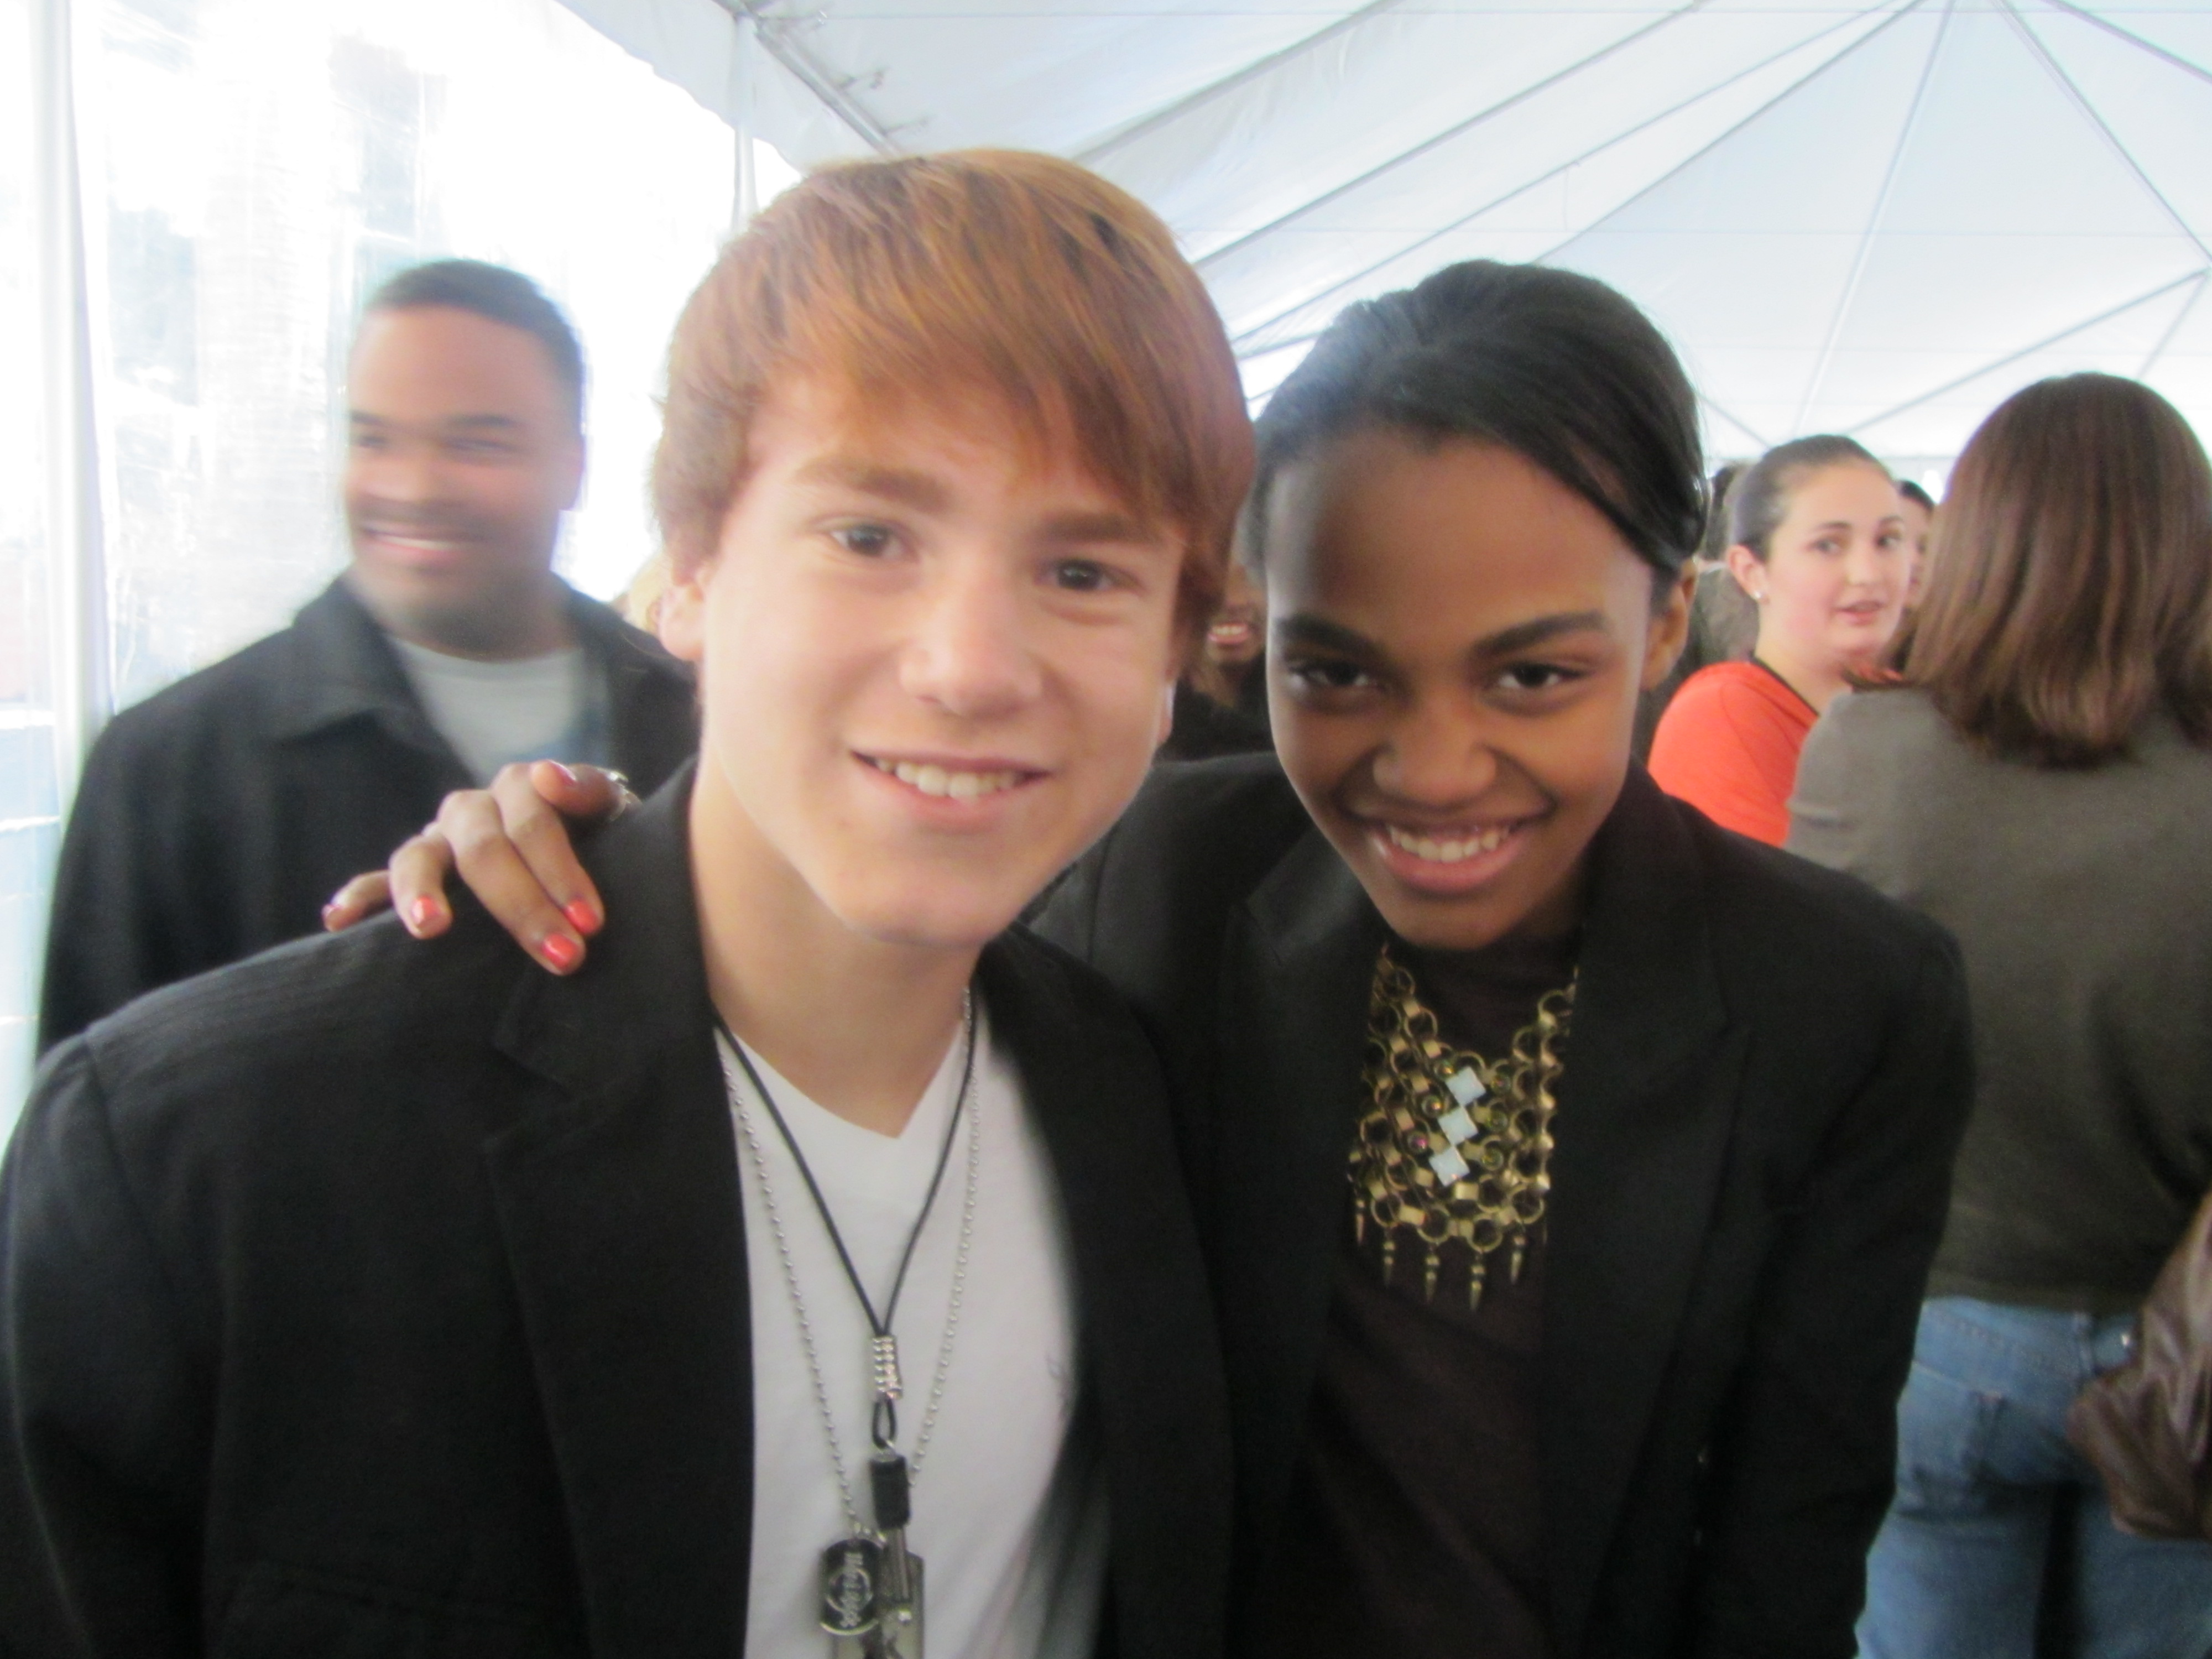 Justin Tinucci with China Ann McClain at the premiere of The Muppets.